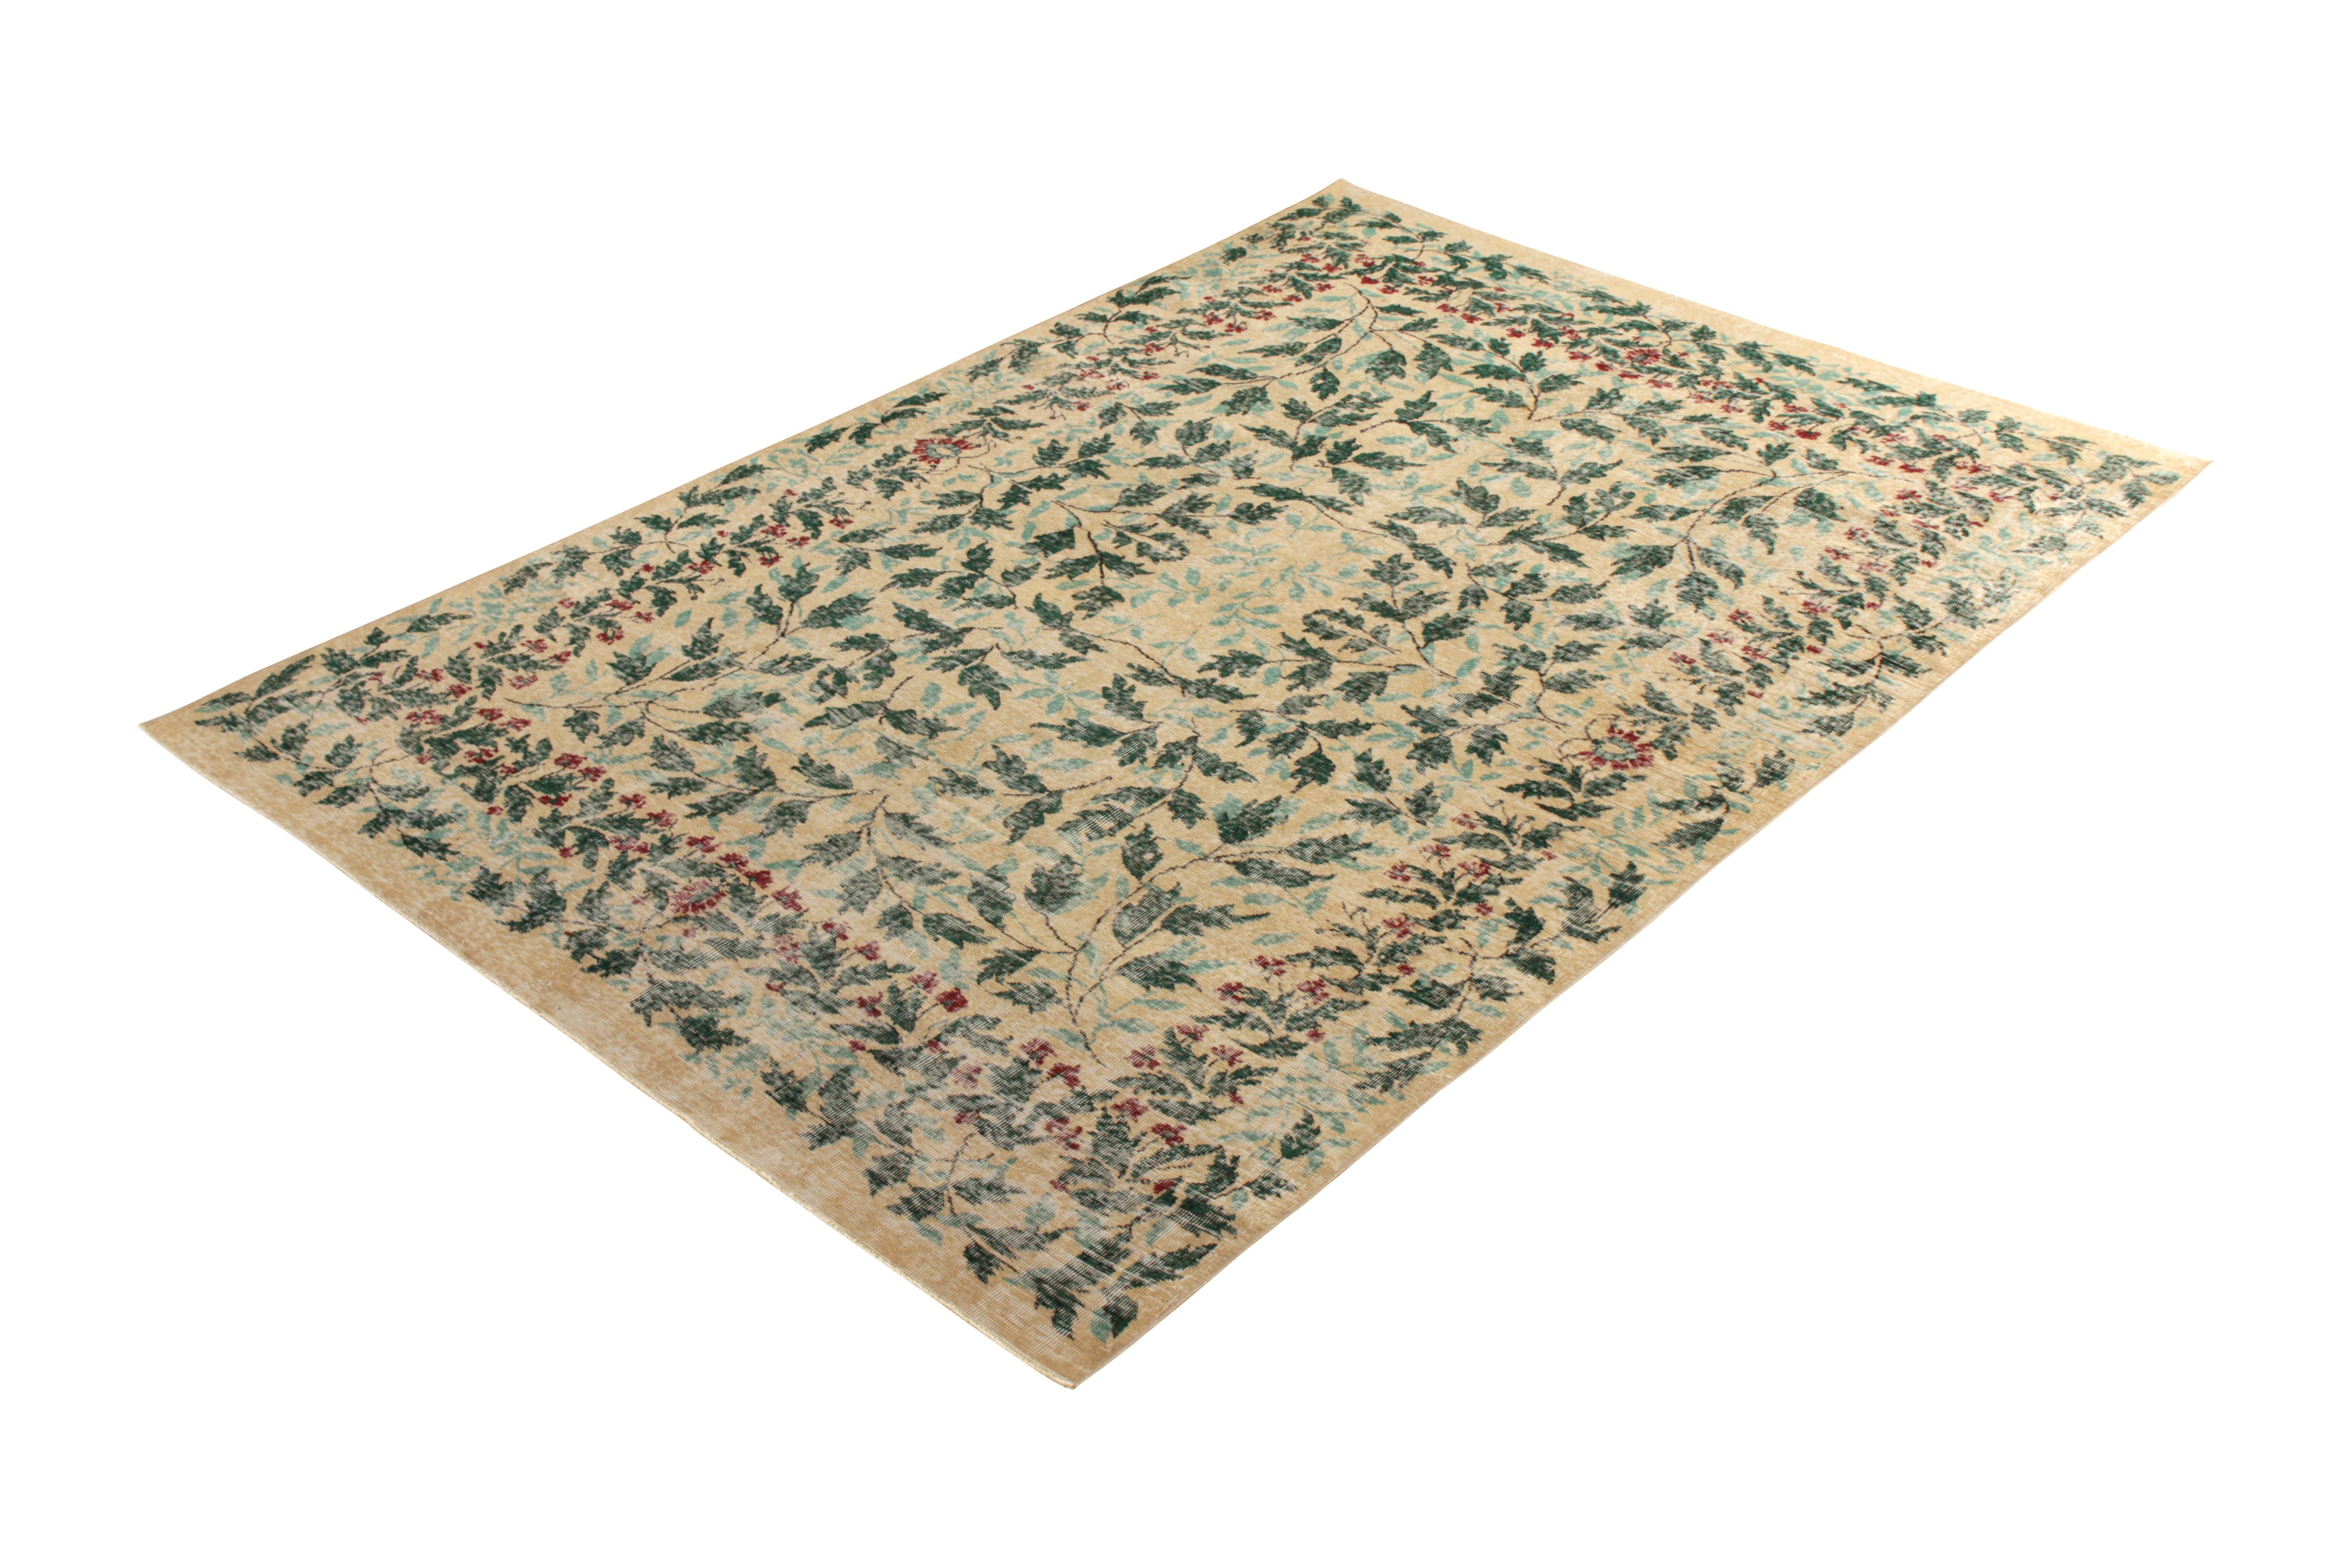 Hand knotted in wool originating from Turkey, circa 1950-1960, this vintage Mid-Century Modern rug is believed to represent the work of Turkish multidisciplinary icon Zeki Müren, celebrated in our Midcentury Pasha collection for a variety of unique